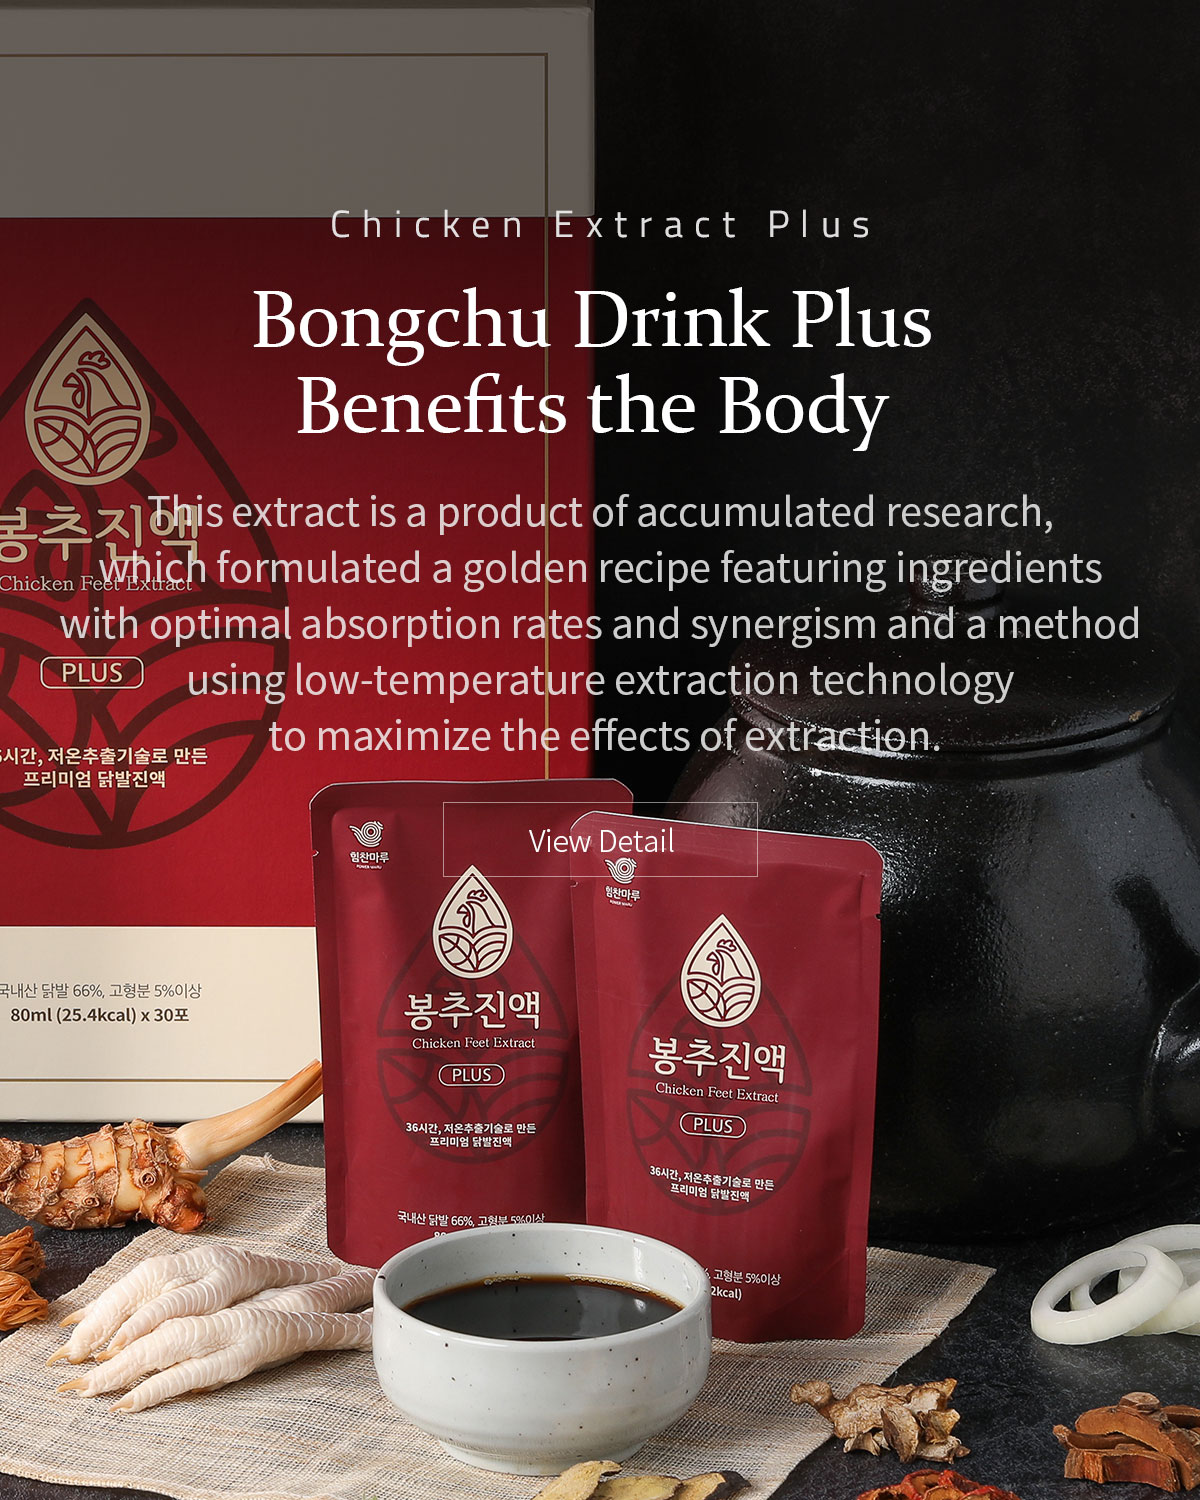 Bongchu Drink Plus Benefits the Body. This extract is a product of accumulated research, which formulated a golden recipe featuring ingredients with optimal absorption rates and synergism and a method using low-temperature extraction technology to maximize the effects of extraction..